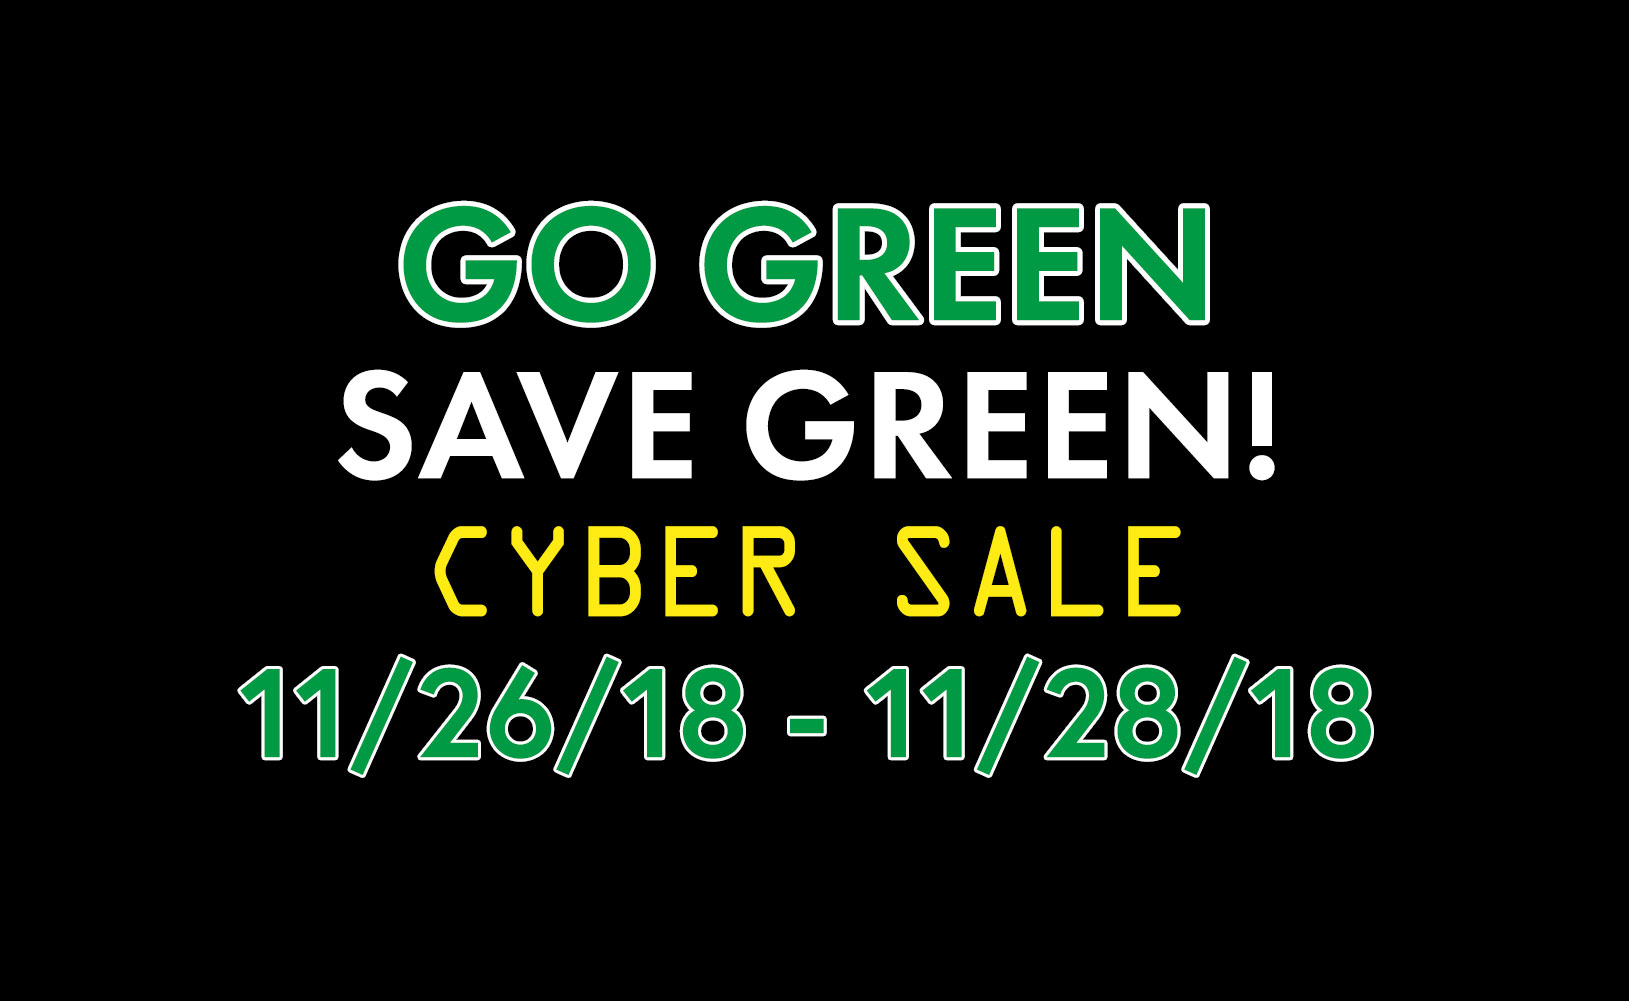 CYBER SALE SAVINGS! 25% Off Today!